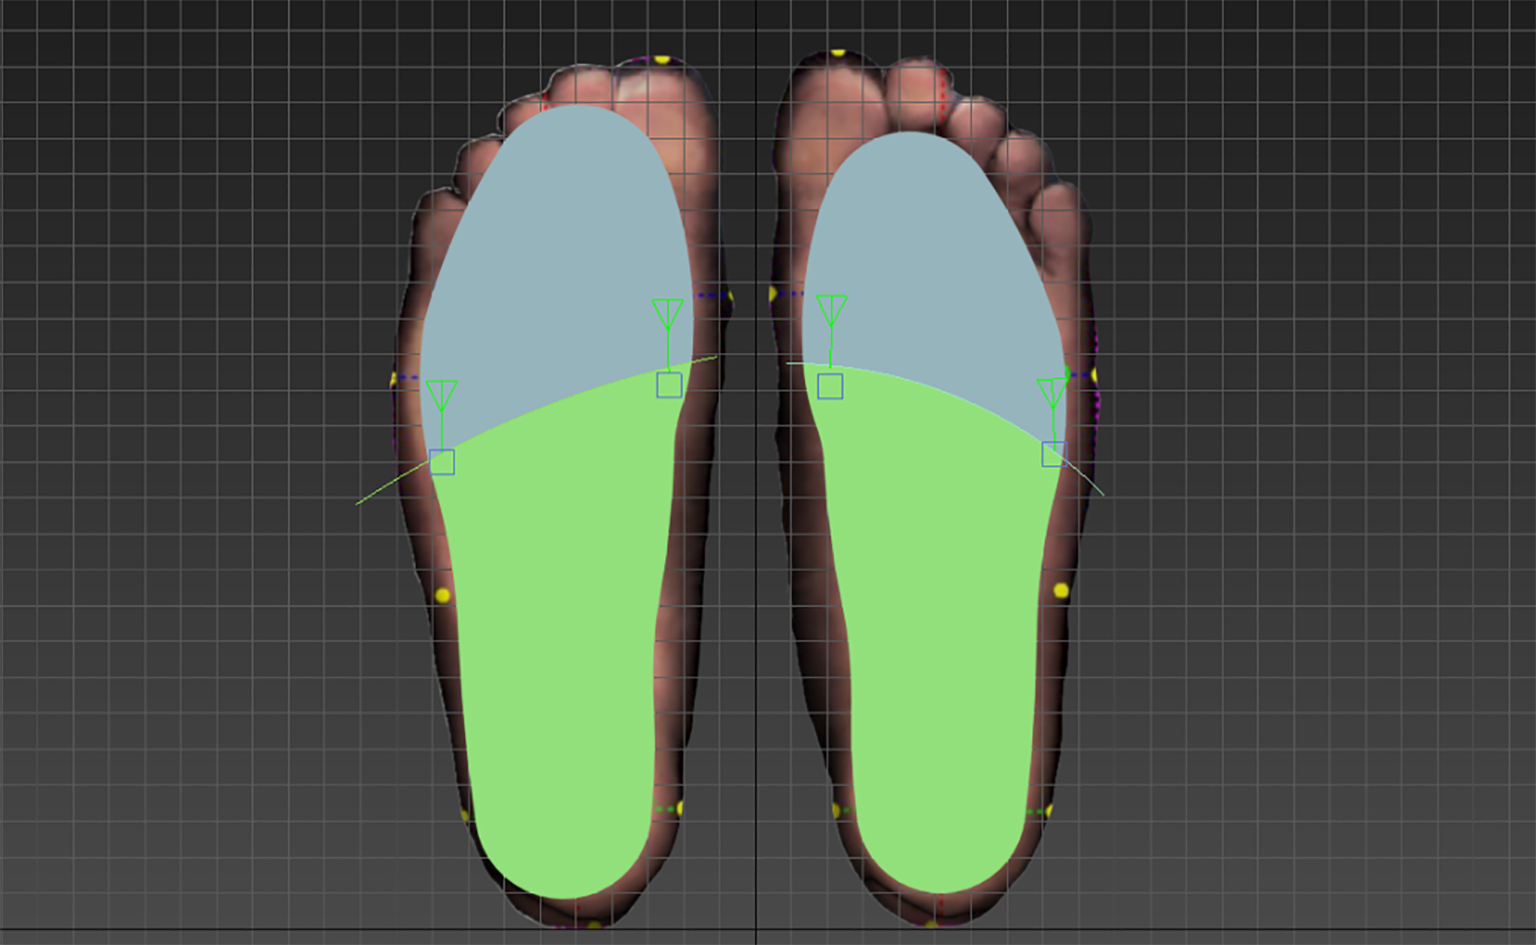 The green area is a 2/3 long foot model area file (D.max).